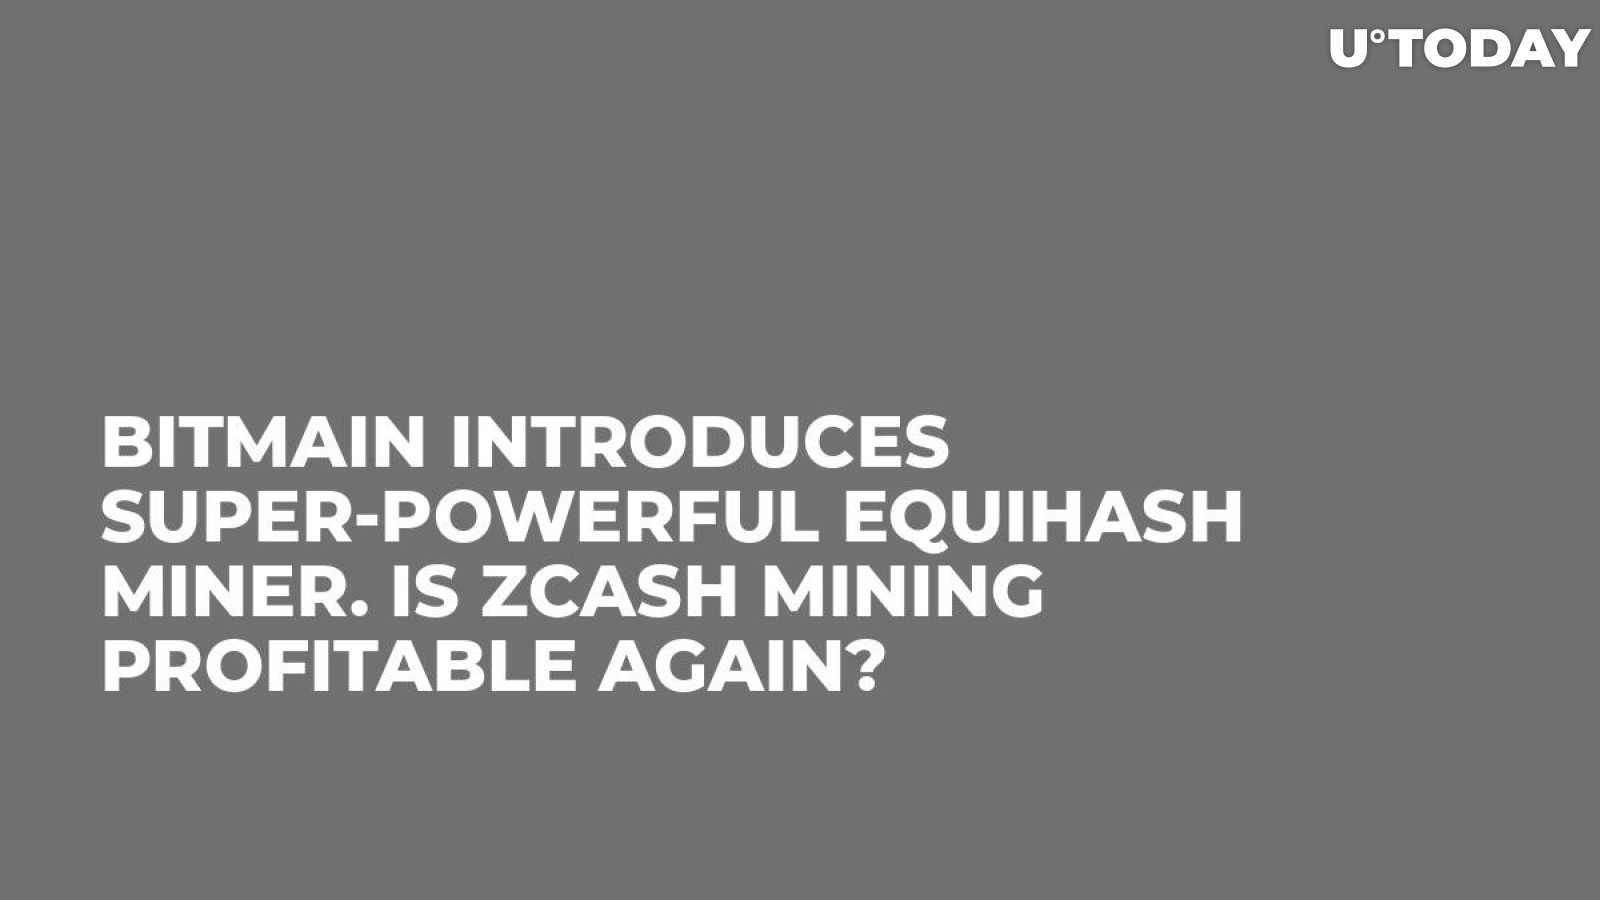 Bitmain Introduces Super-Powerful Equihash Miner. Is Zcash Mining Profitable Again?